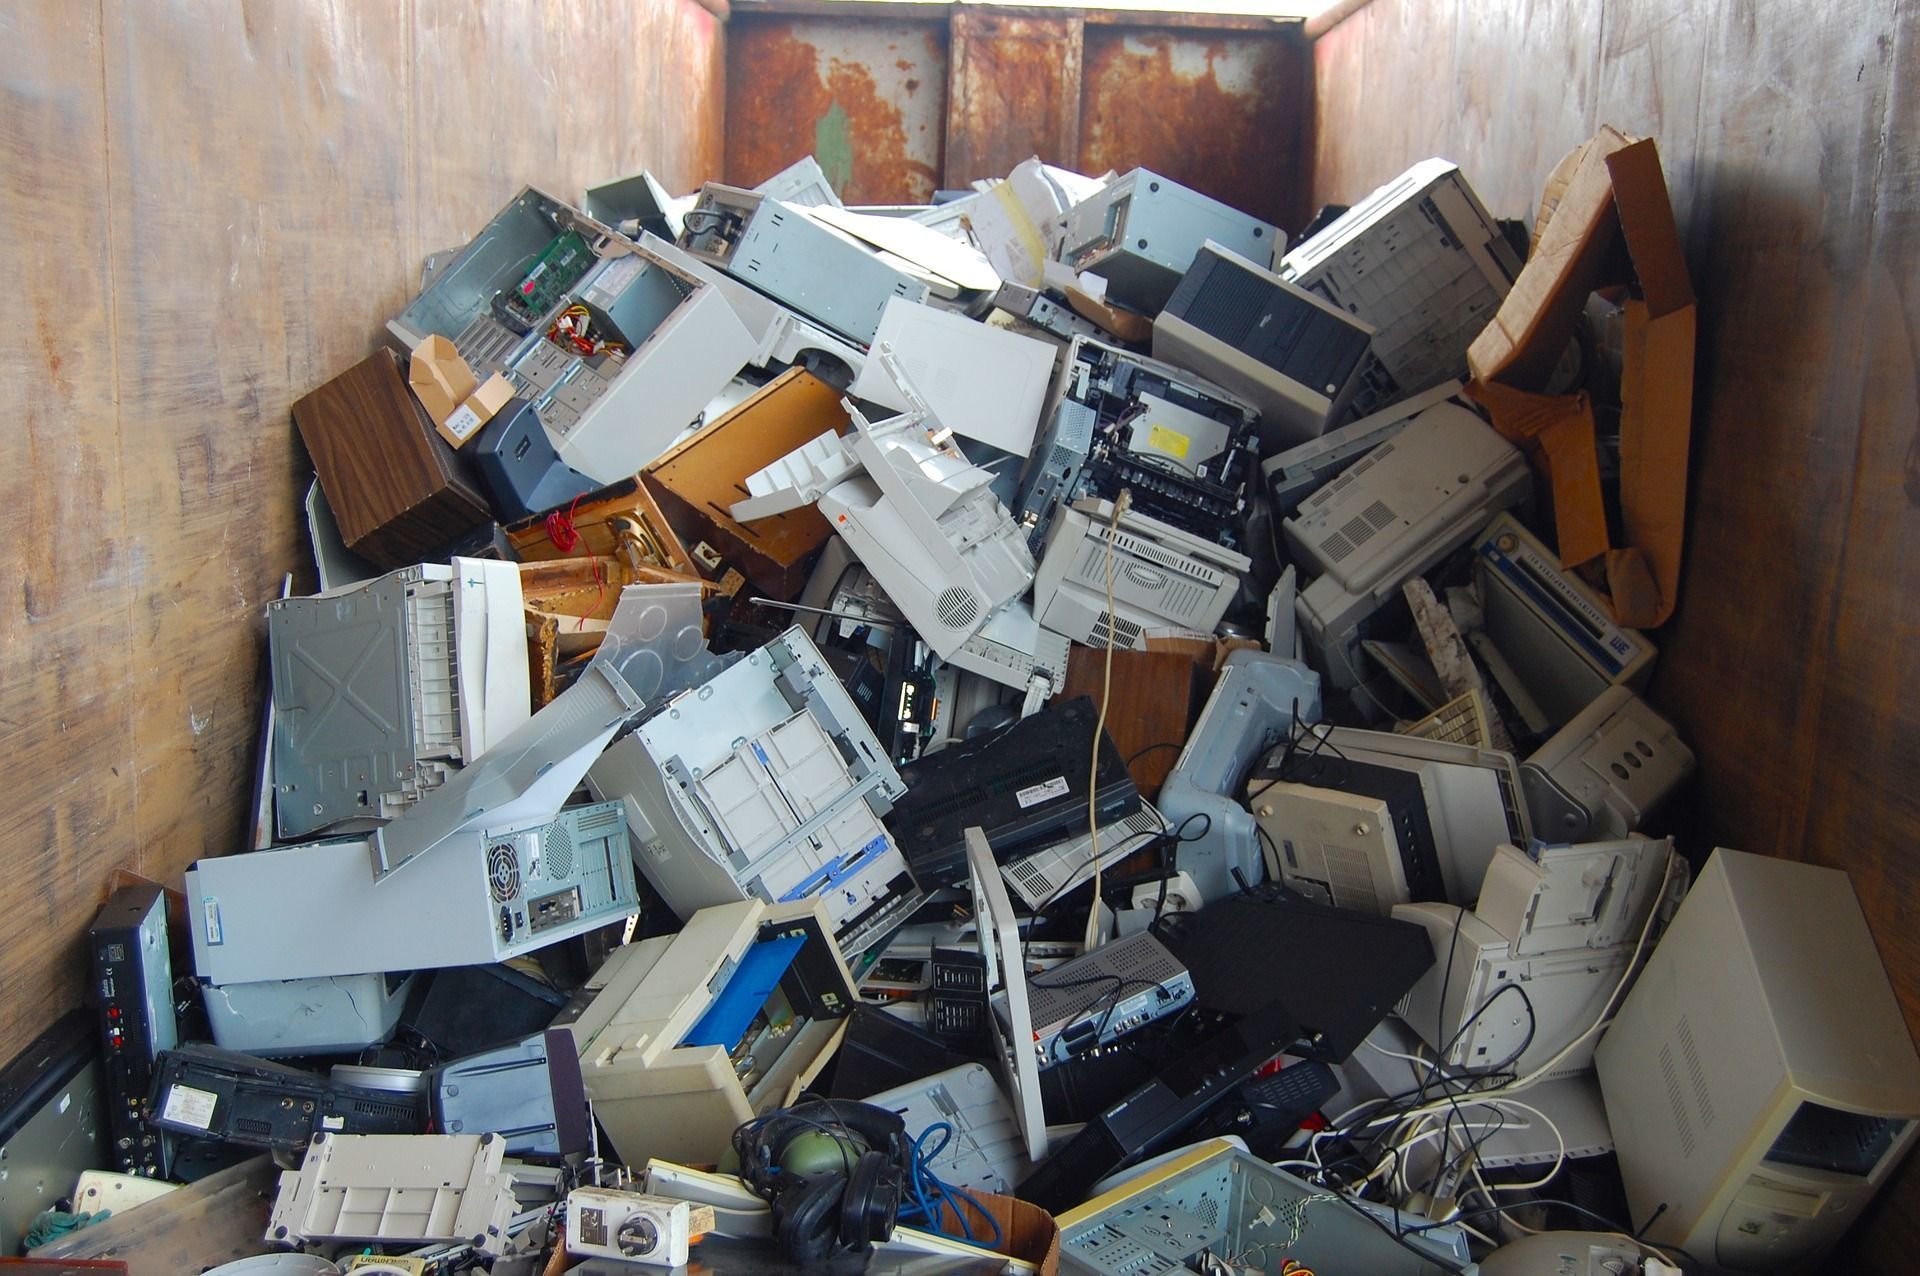 The Most Important Things You Should Know About Recycling Electronics